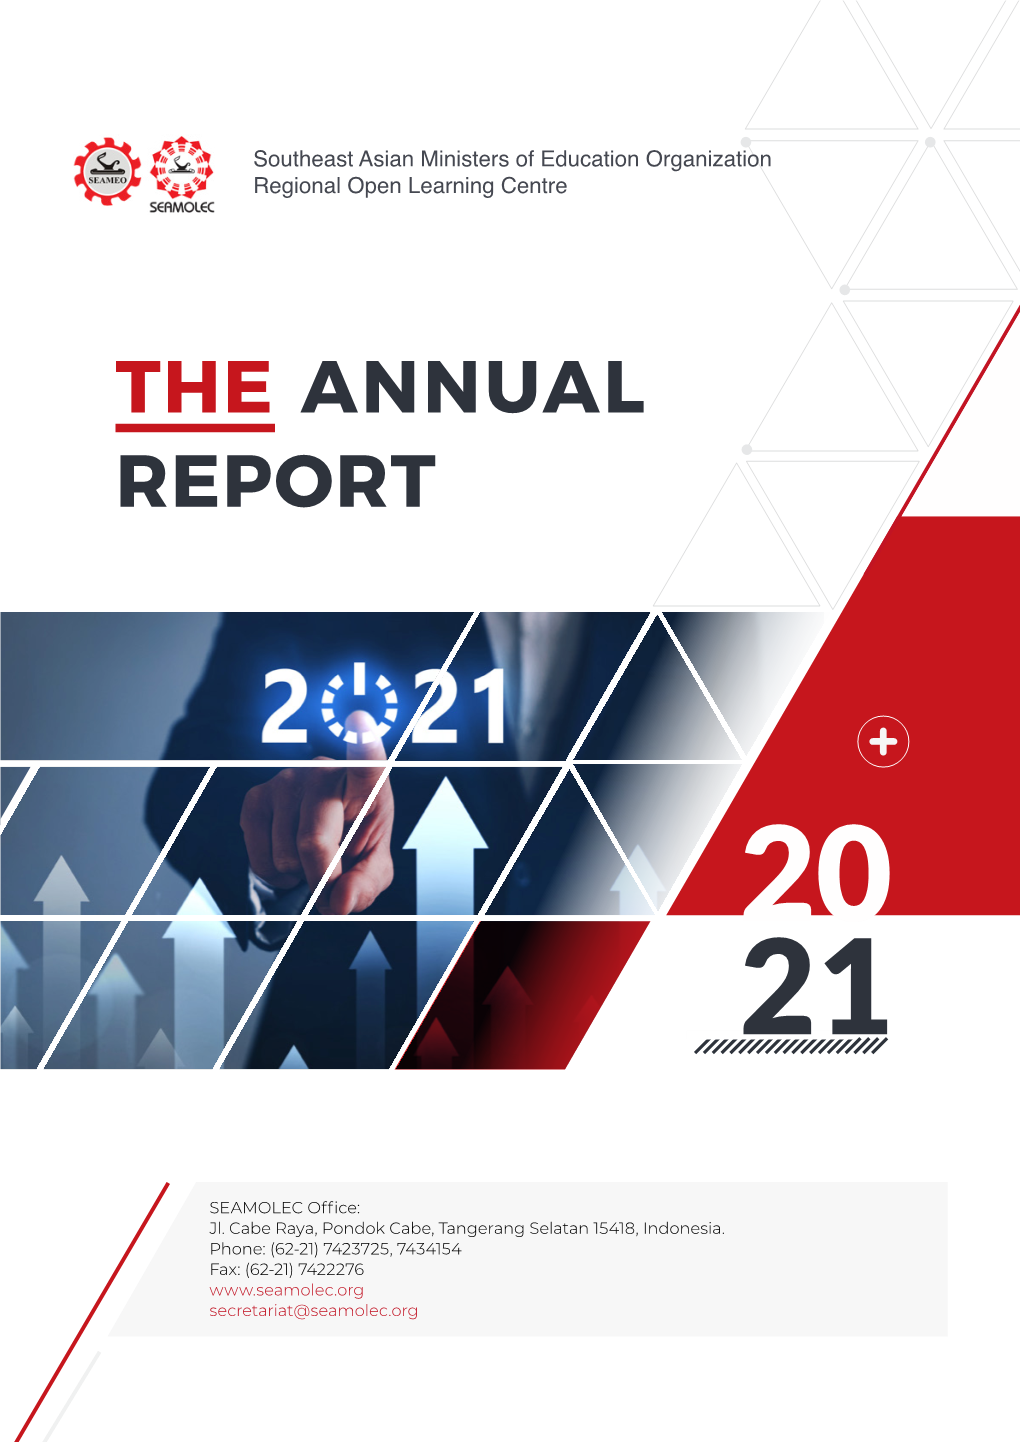 The Annual Report